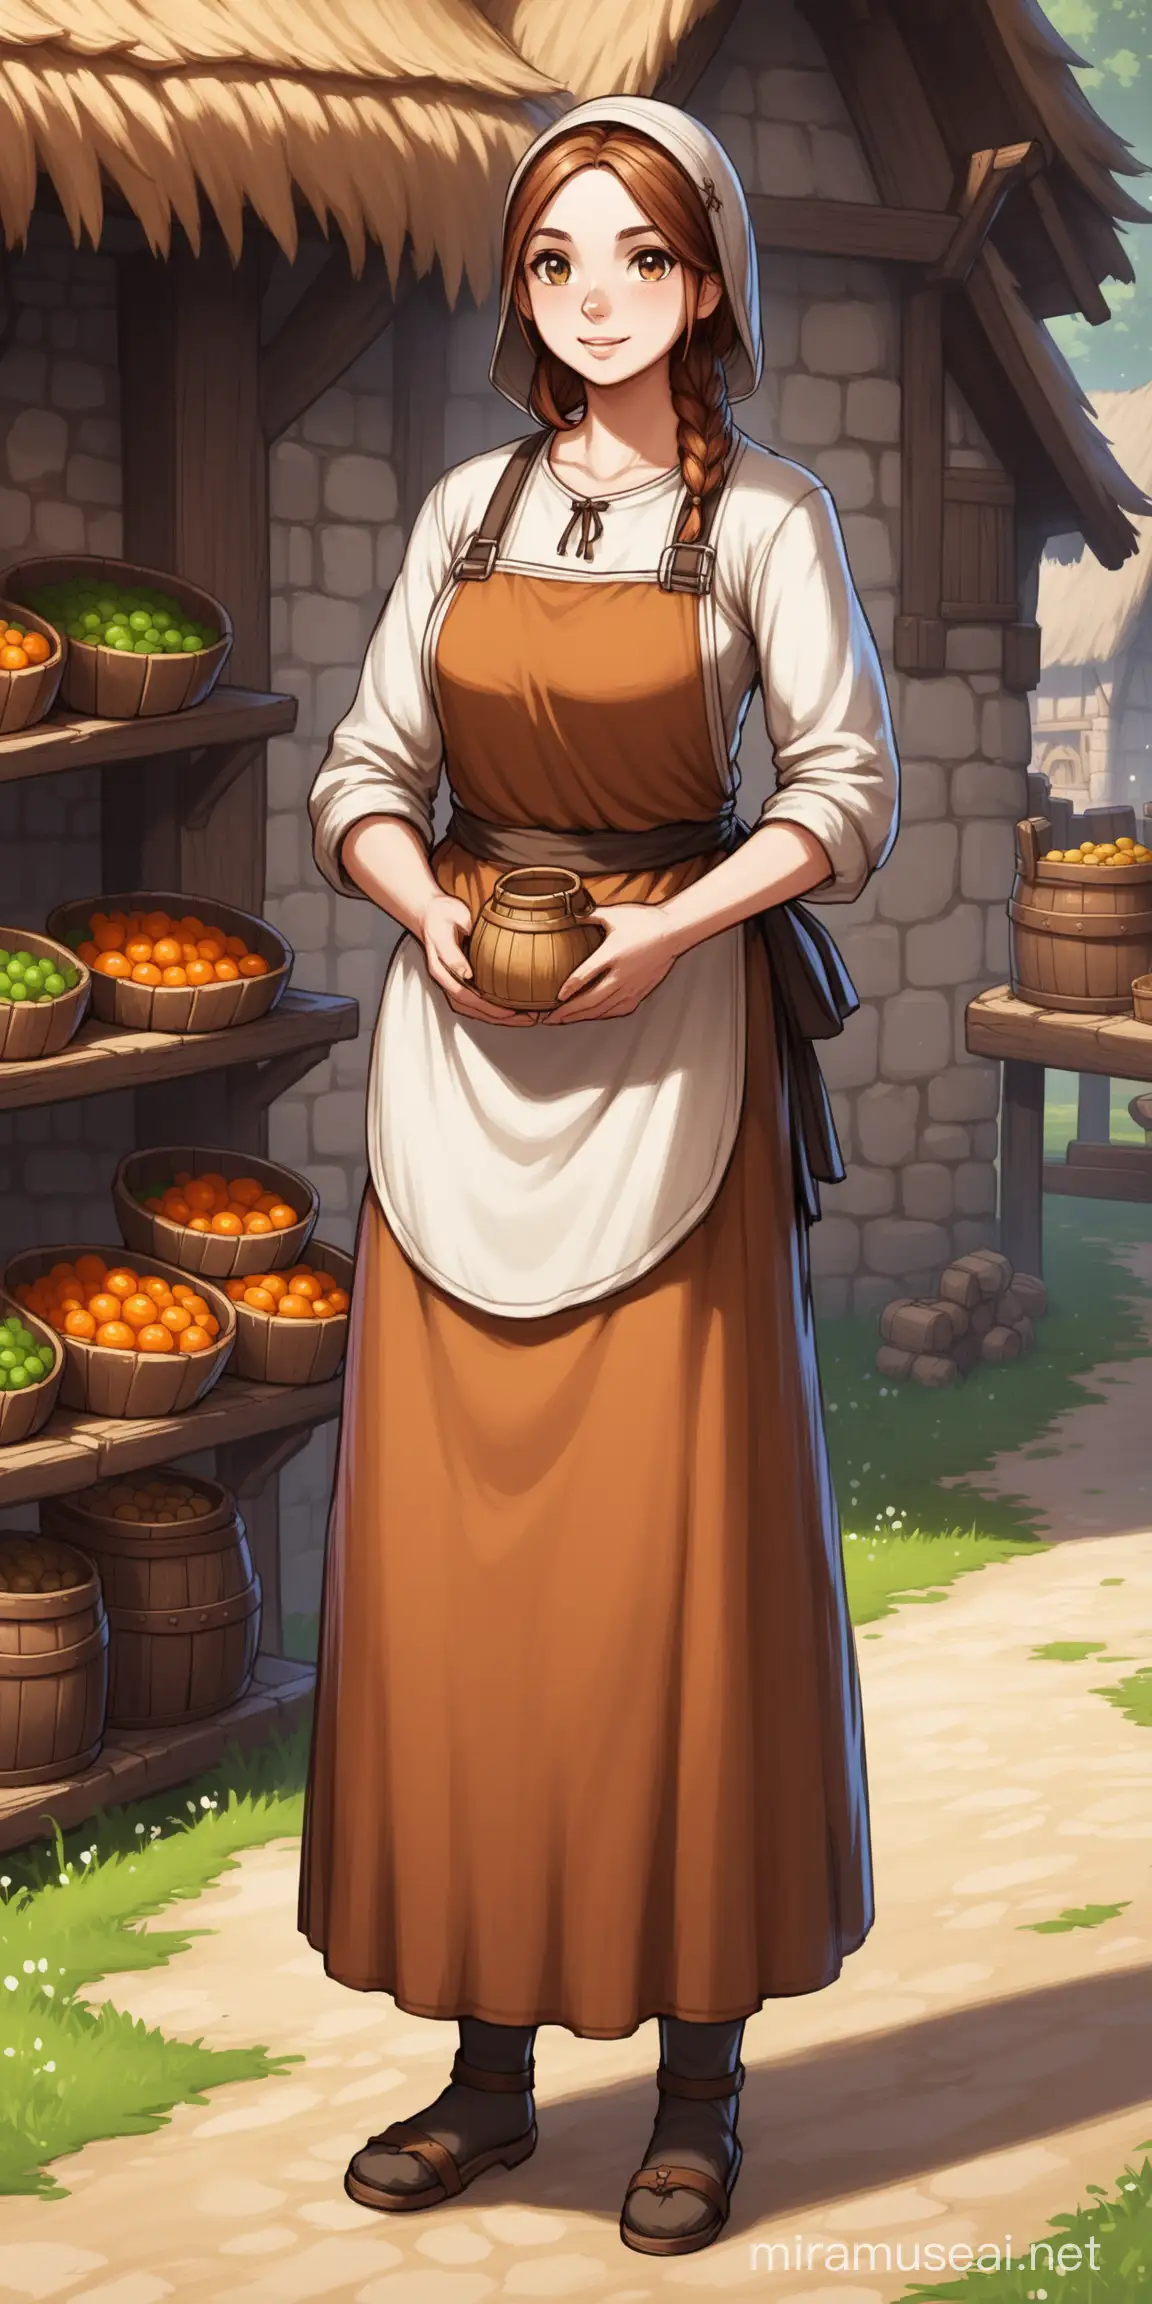 Medieval Fantasy Villager Shopkeeper Female Peasant in Apron Concept Art